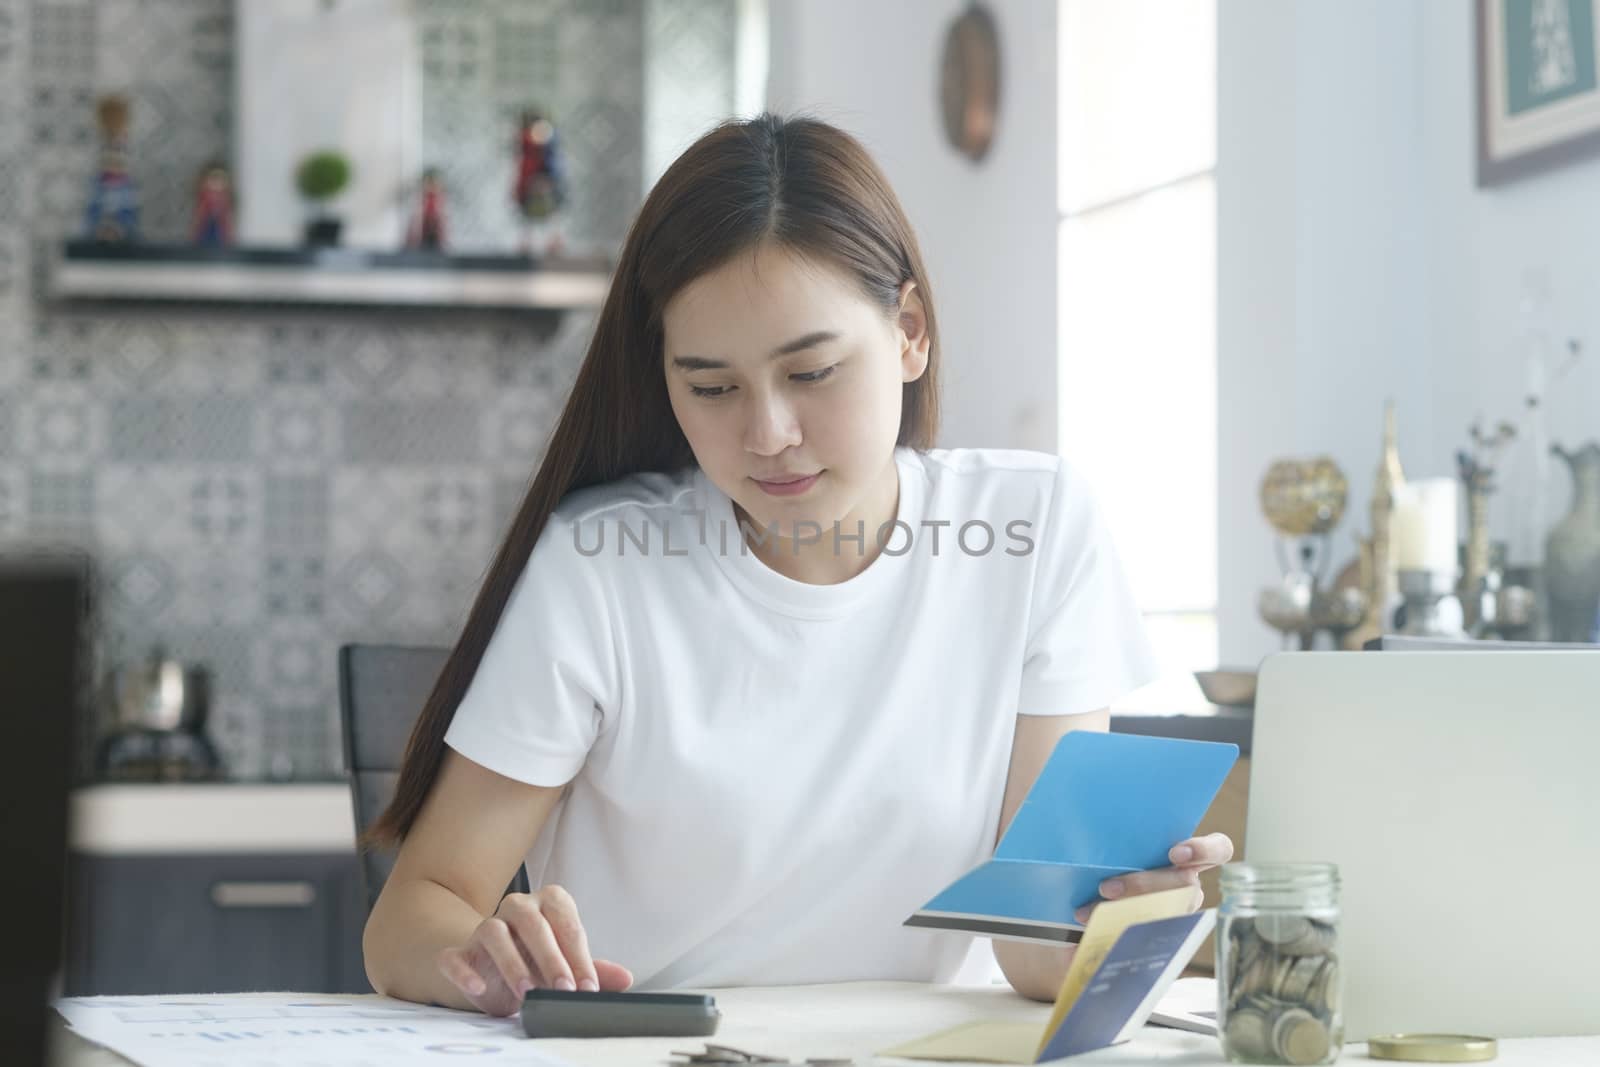 Attractive young Asia woman working at home. Working and learning from home.

